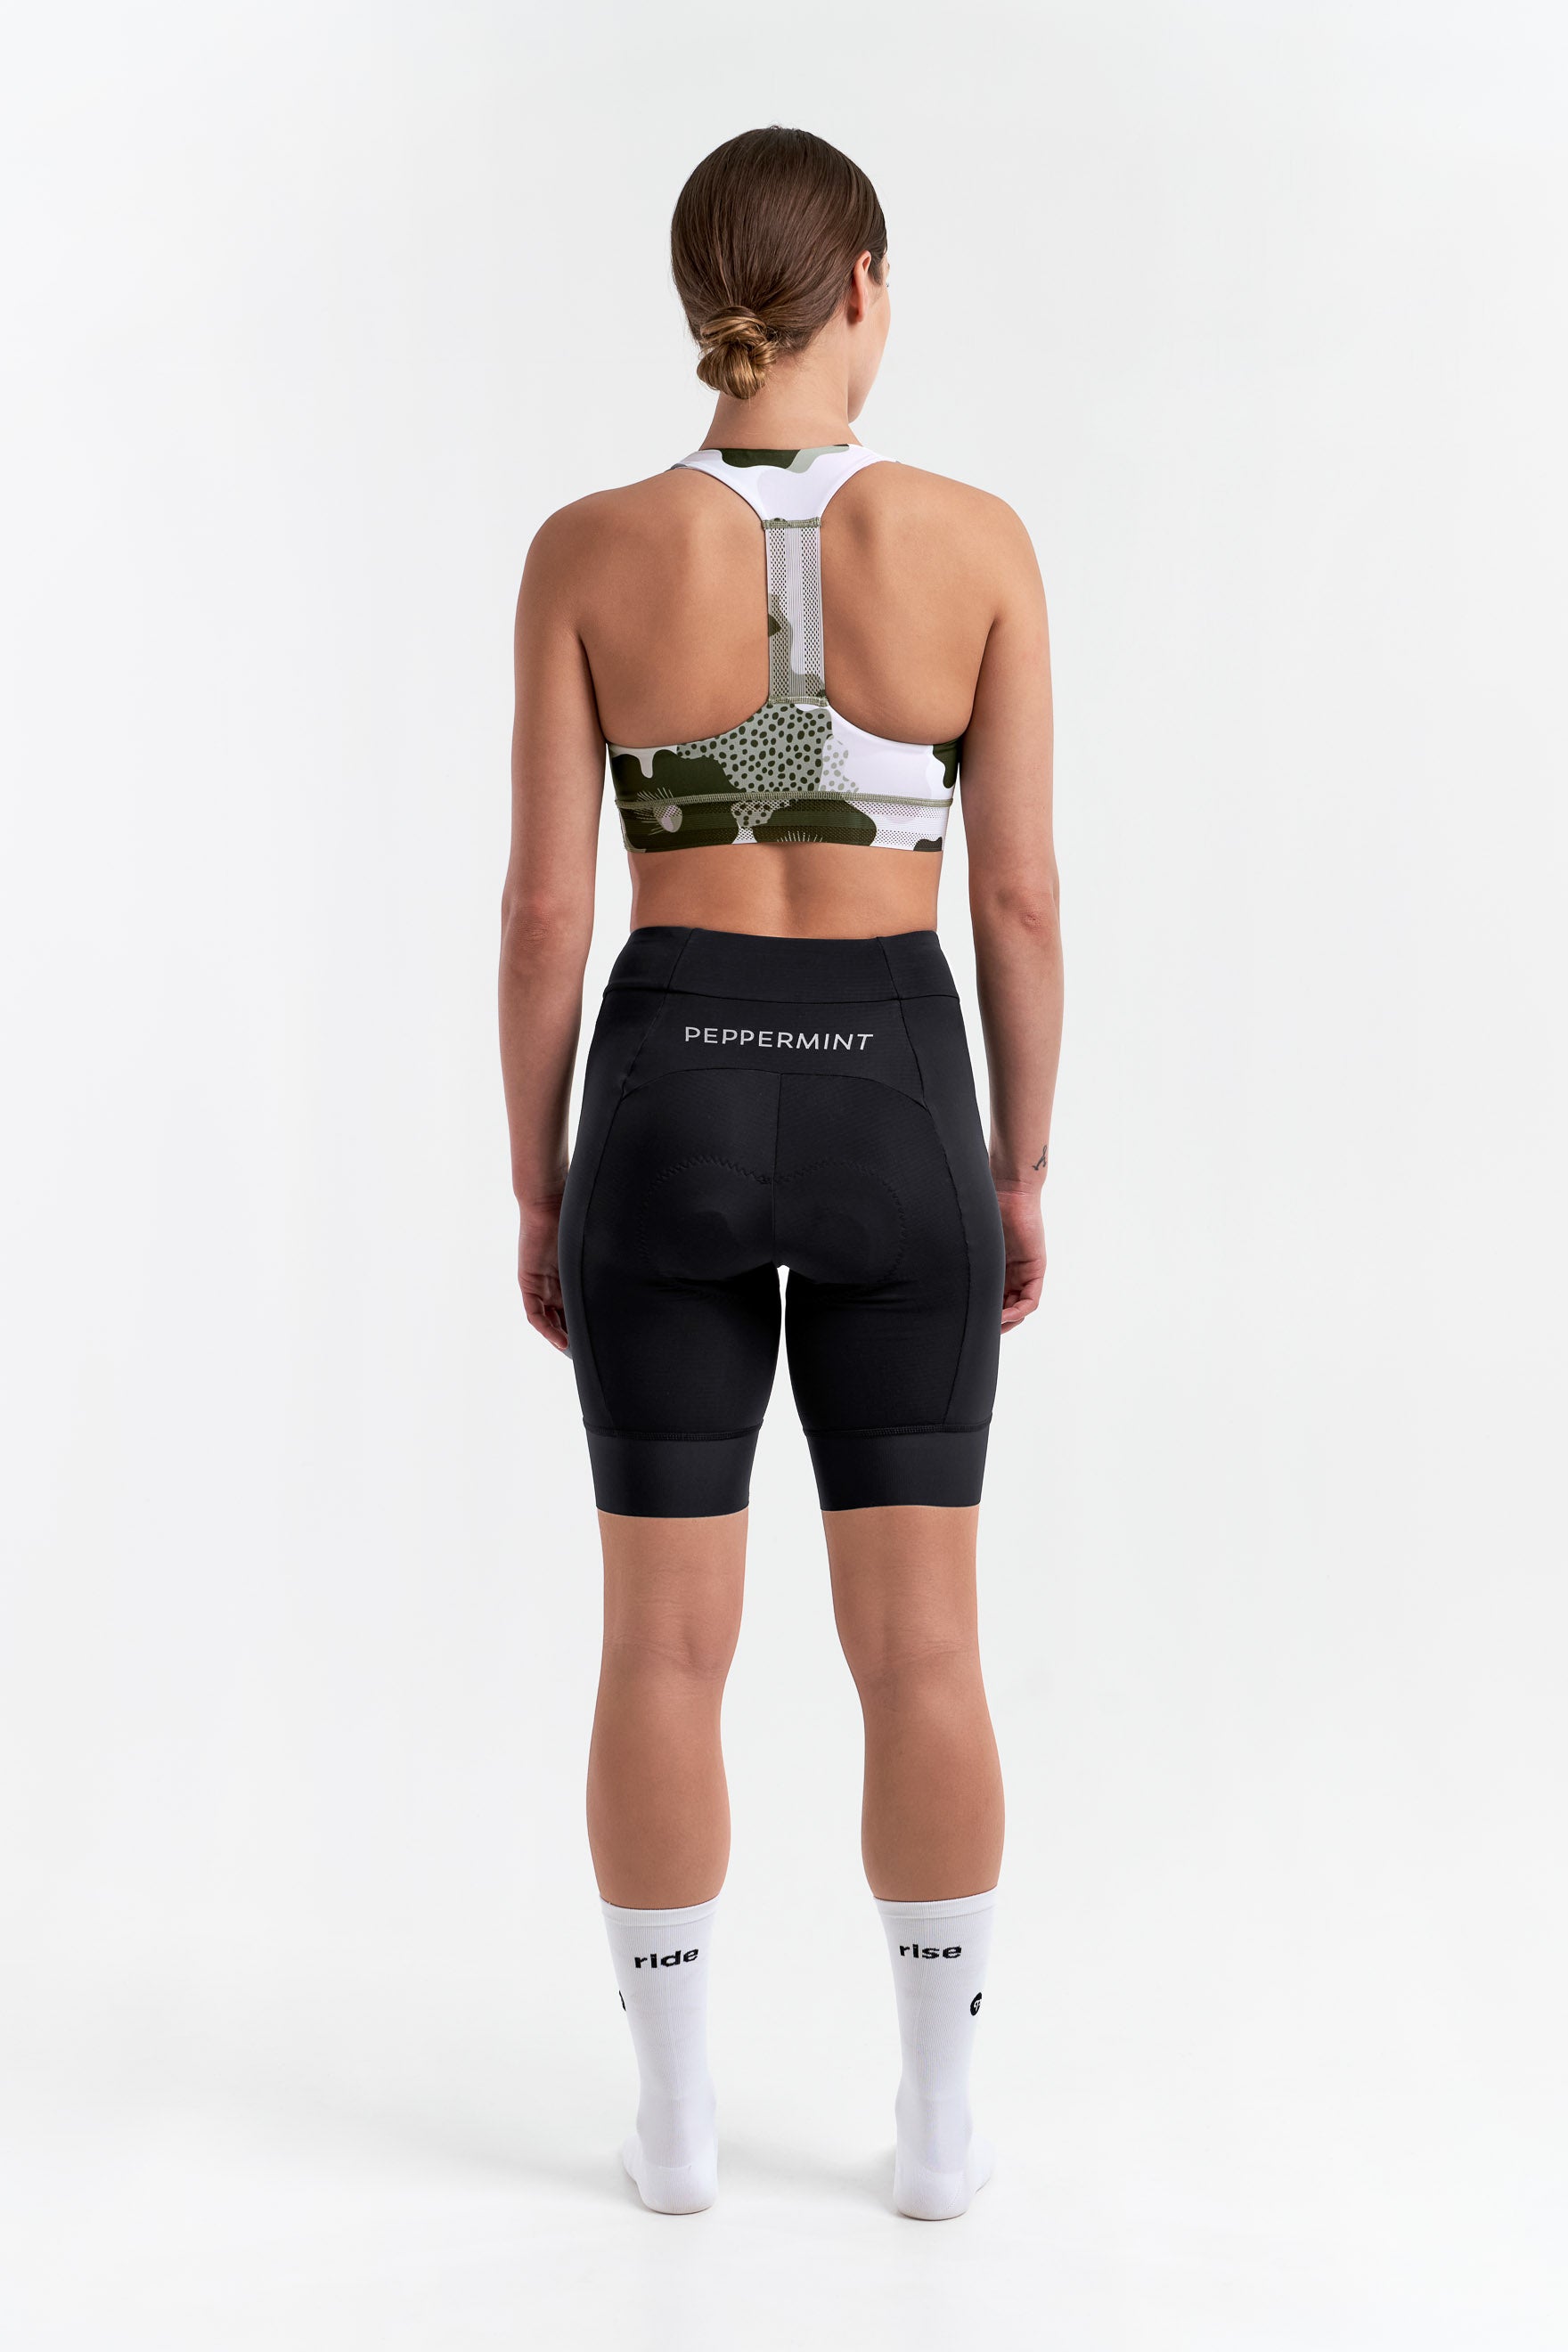 SAMPLE - Signature Sports Bra – PEPPERMINT Cycling Co.